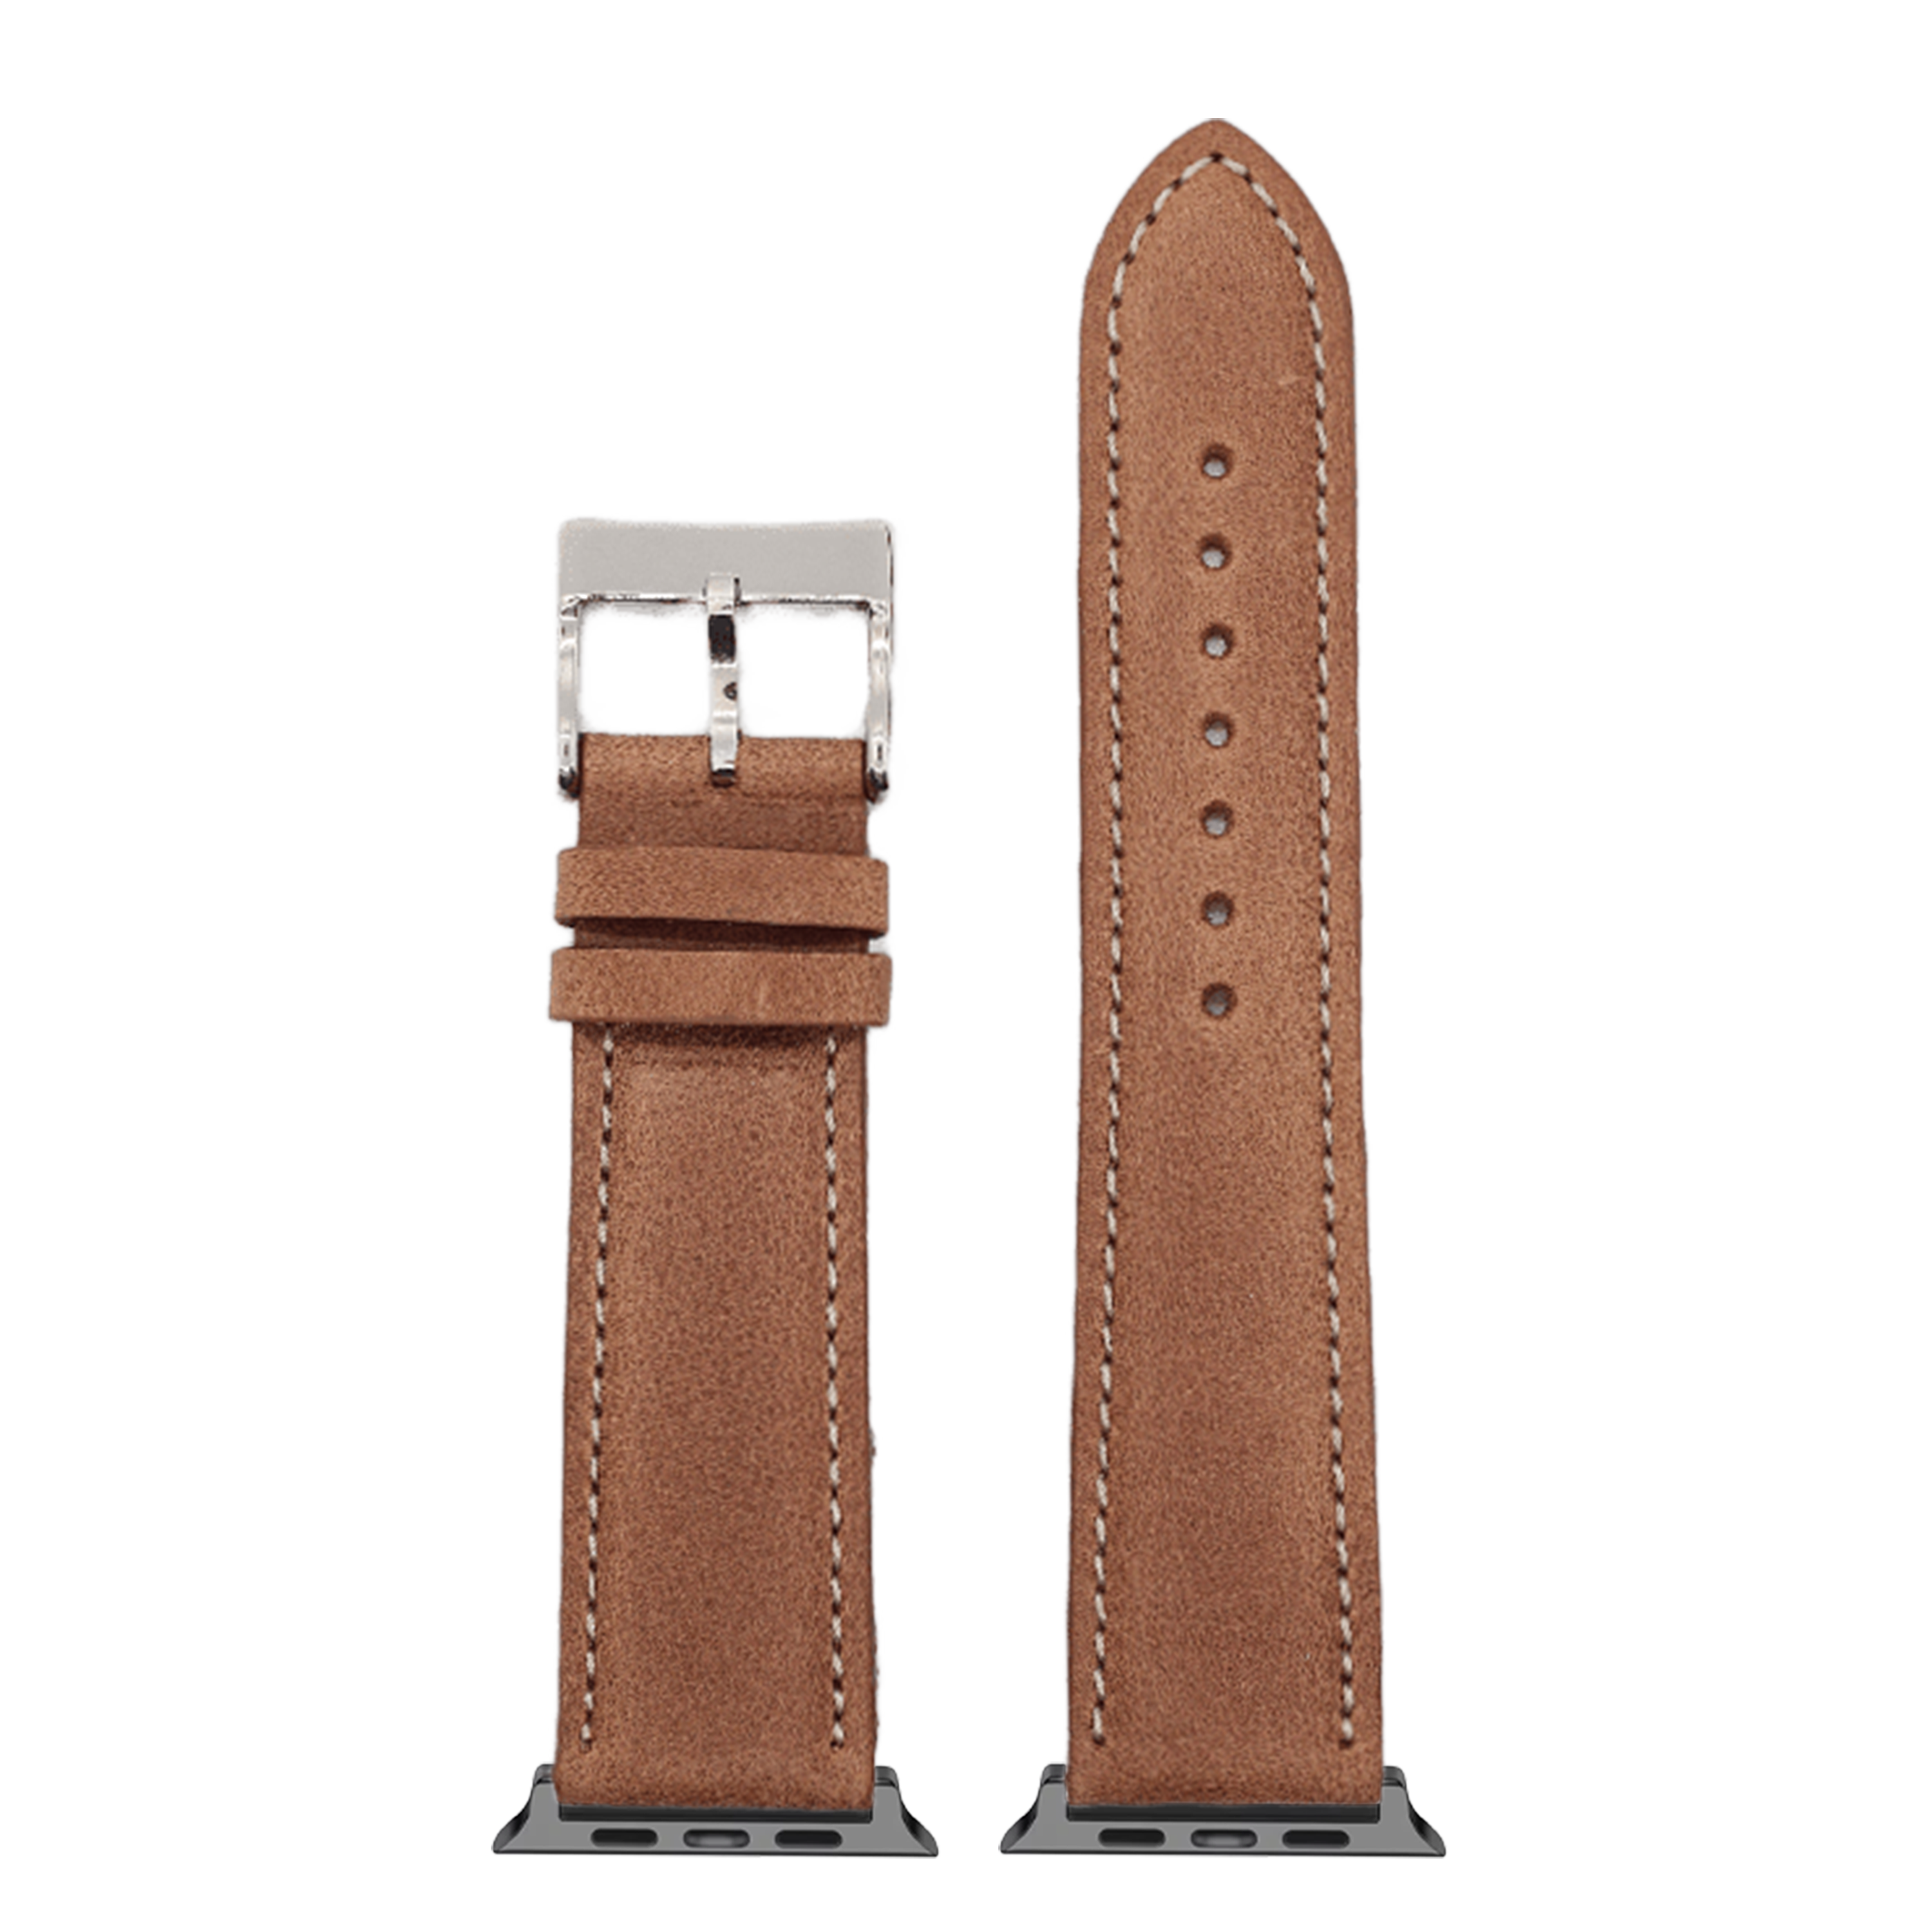 [Apple Watch] Padded Leather - Brown | Beige Stitching